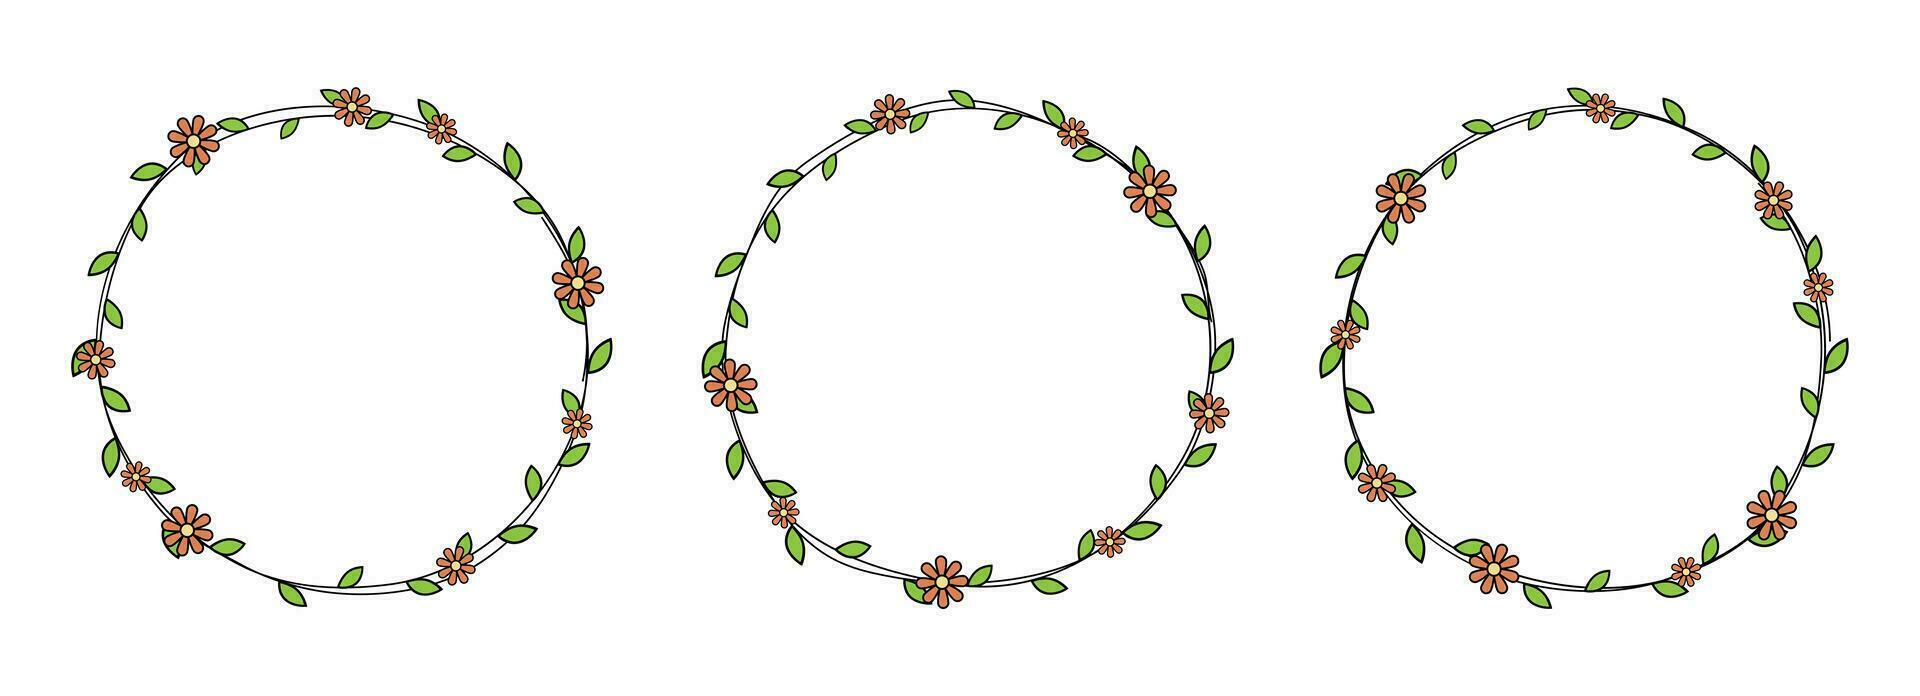 Hand drawn circle frame decoration element with leaves and flowers clip art vector